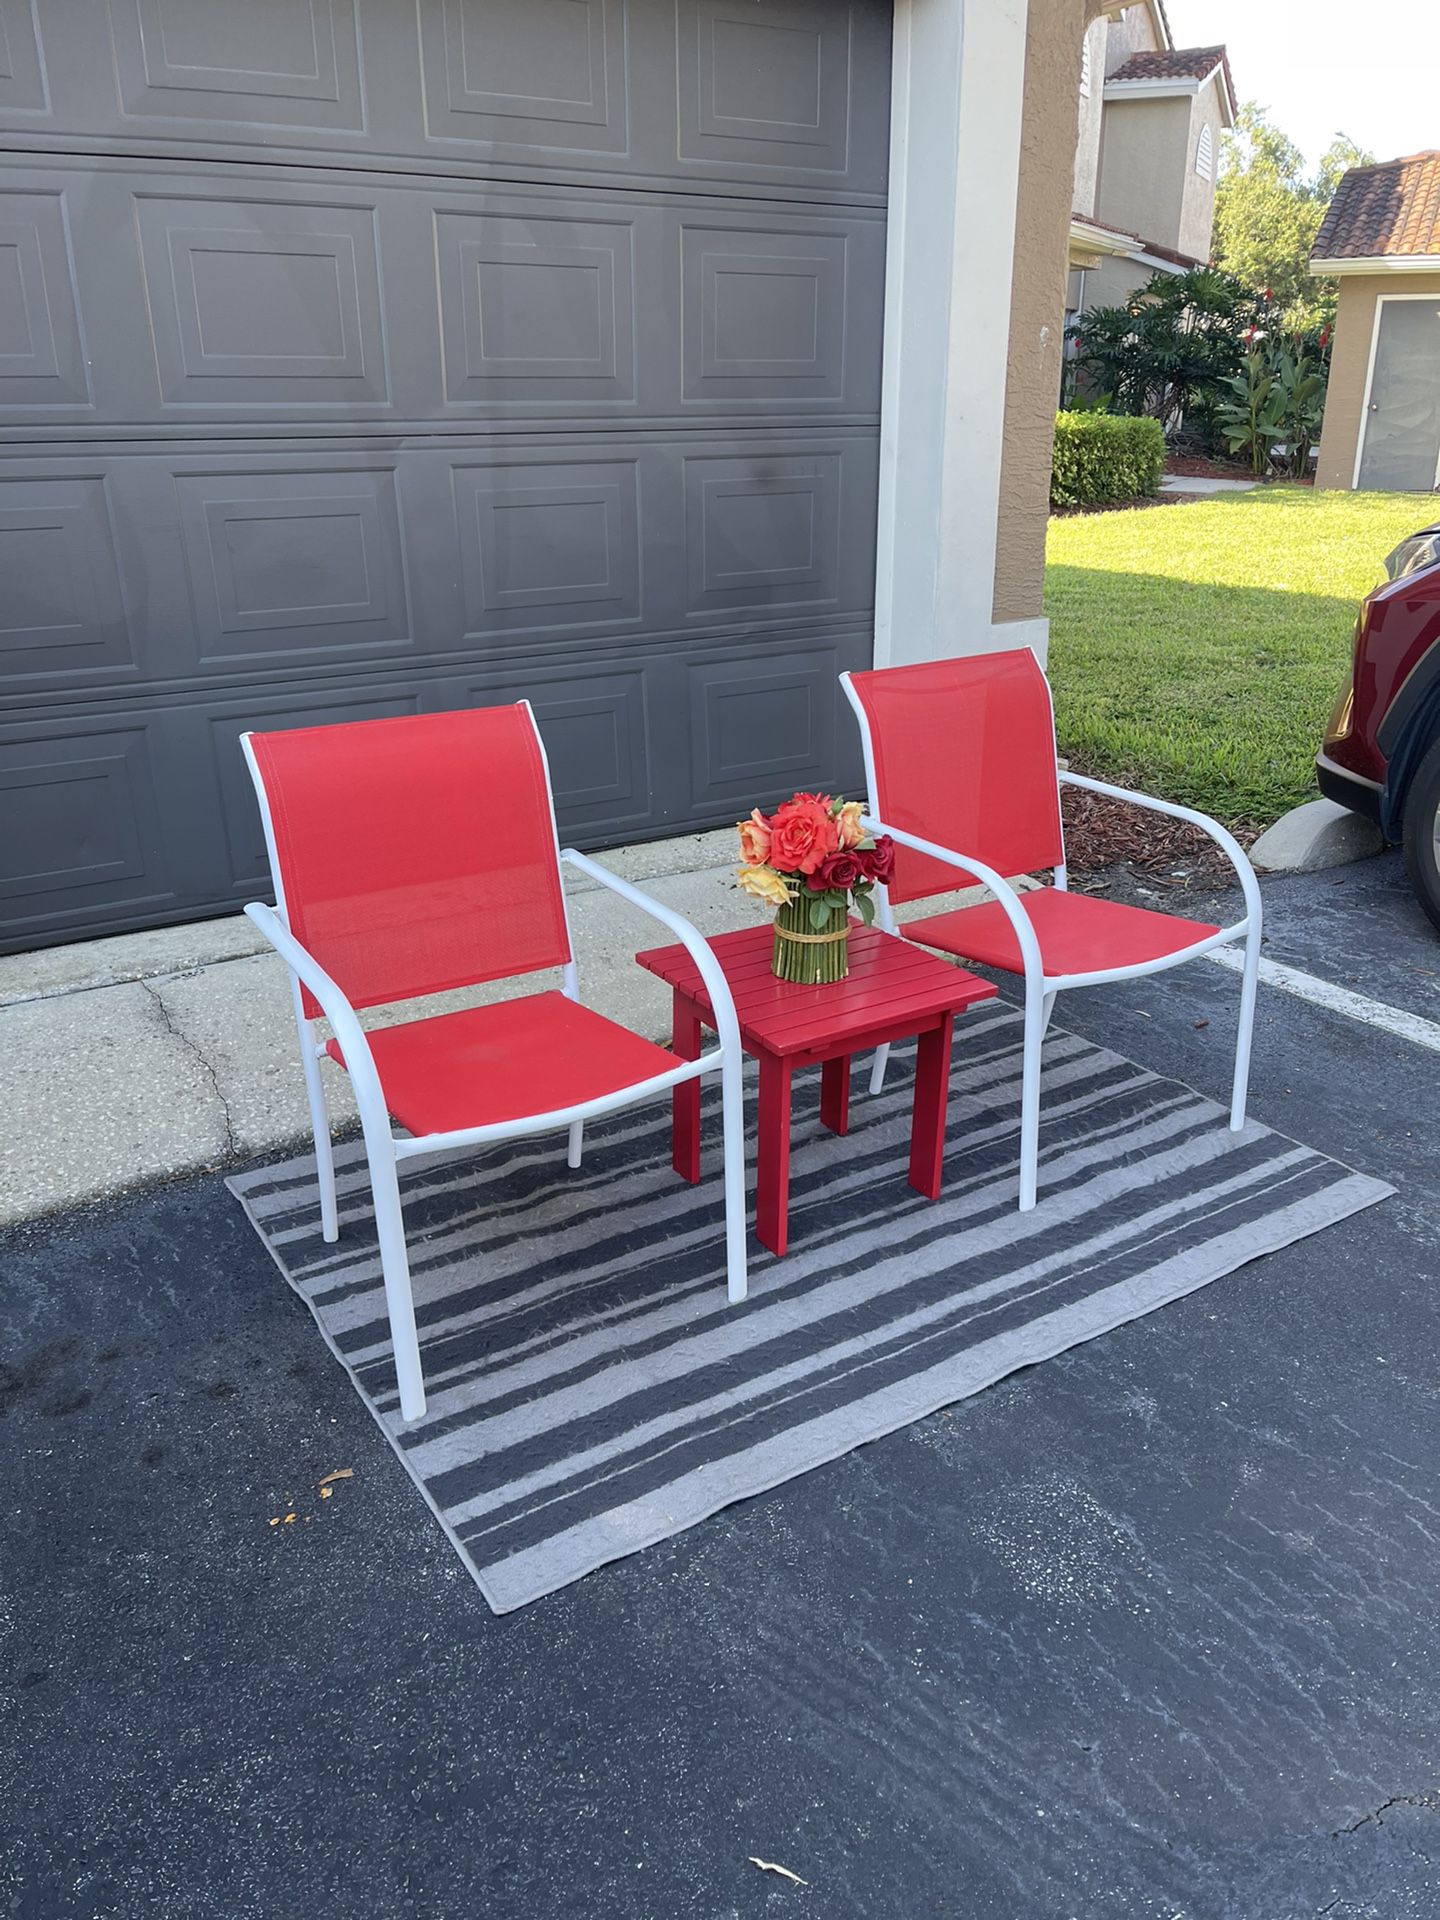 2 Patio Chairs & Table - $49 For Three Of Them - Delivery Available 